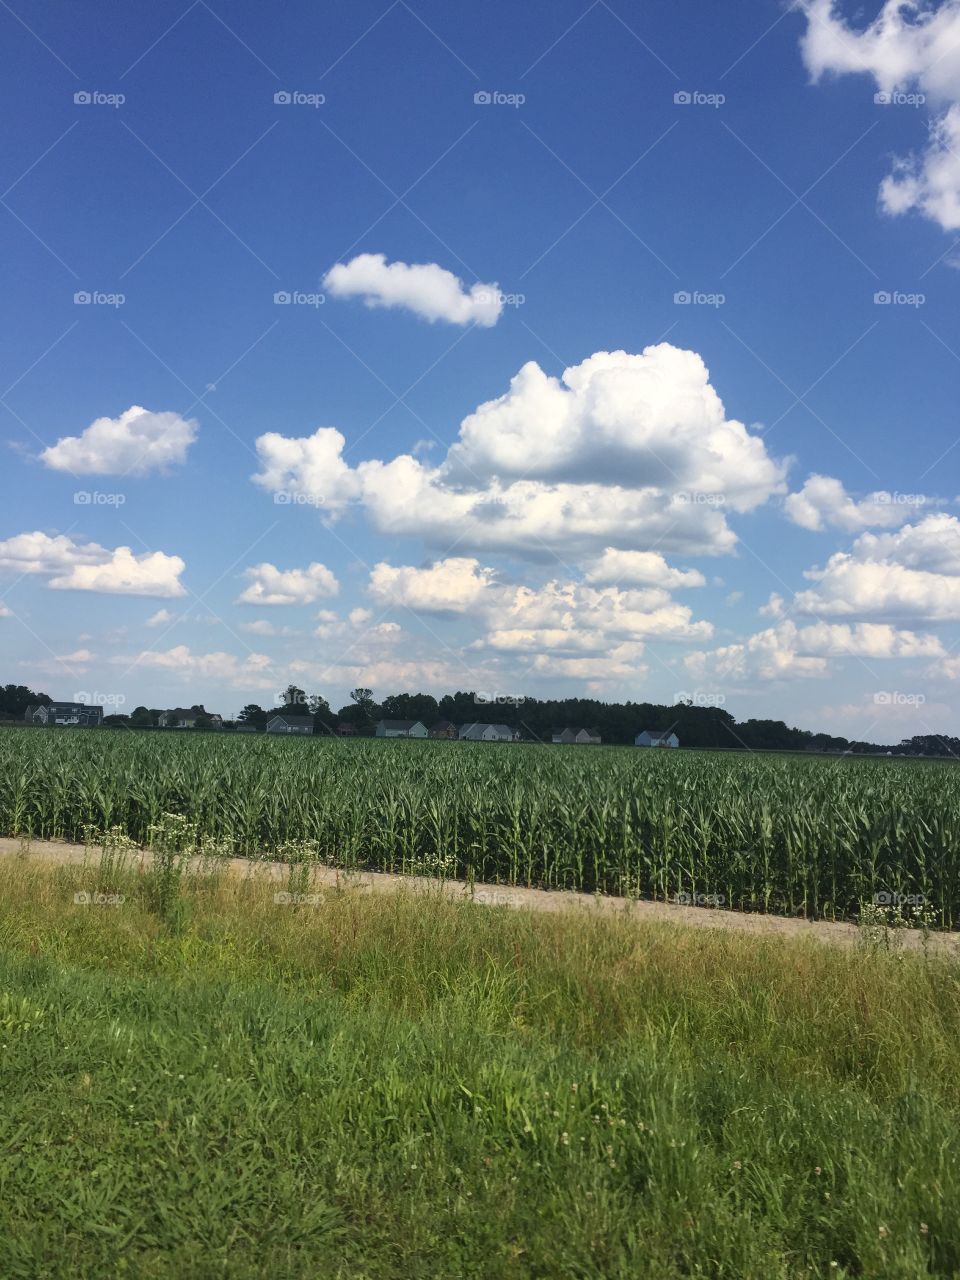 Country side and corn field